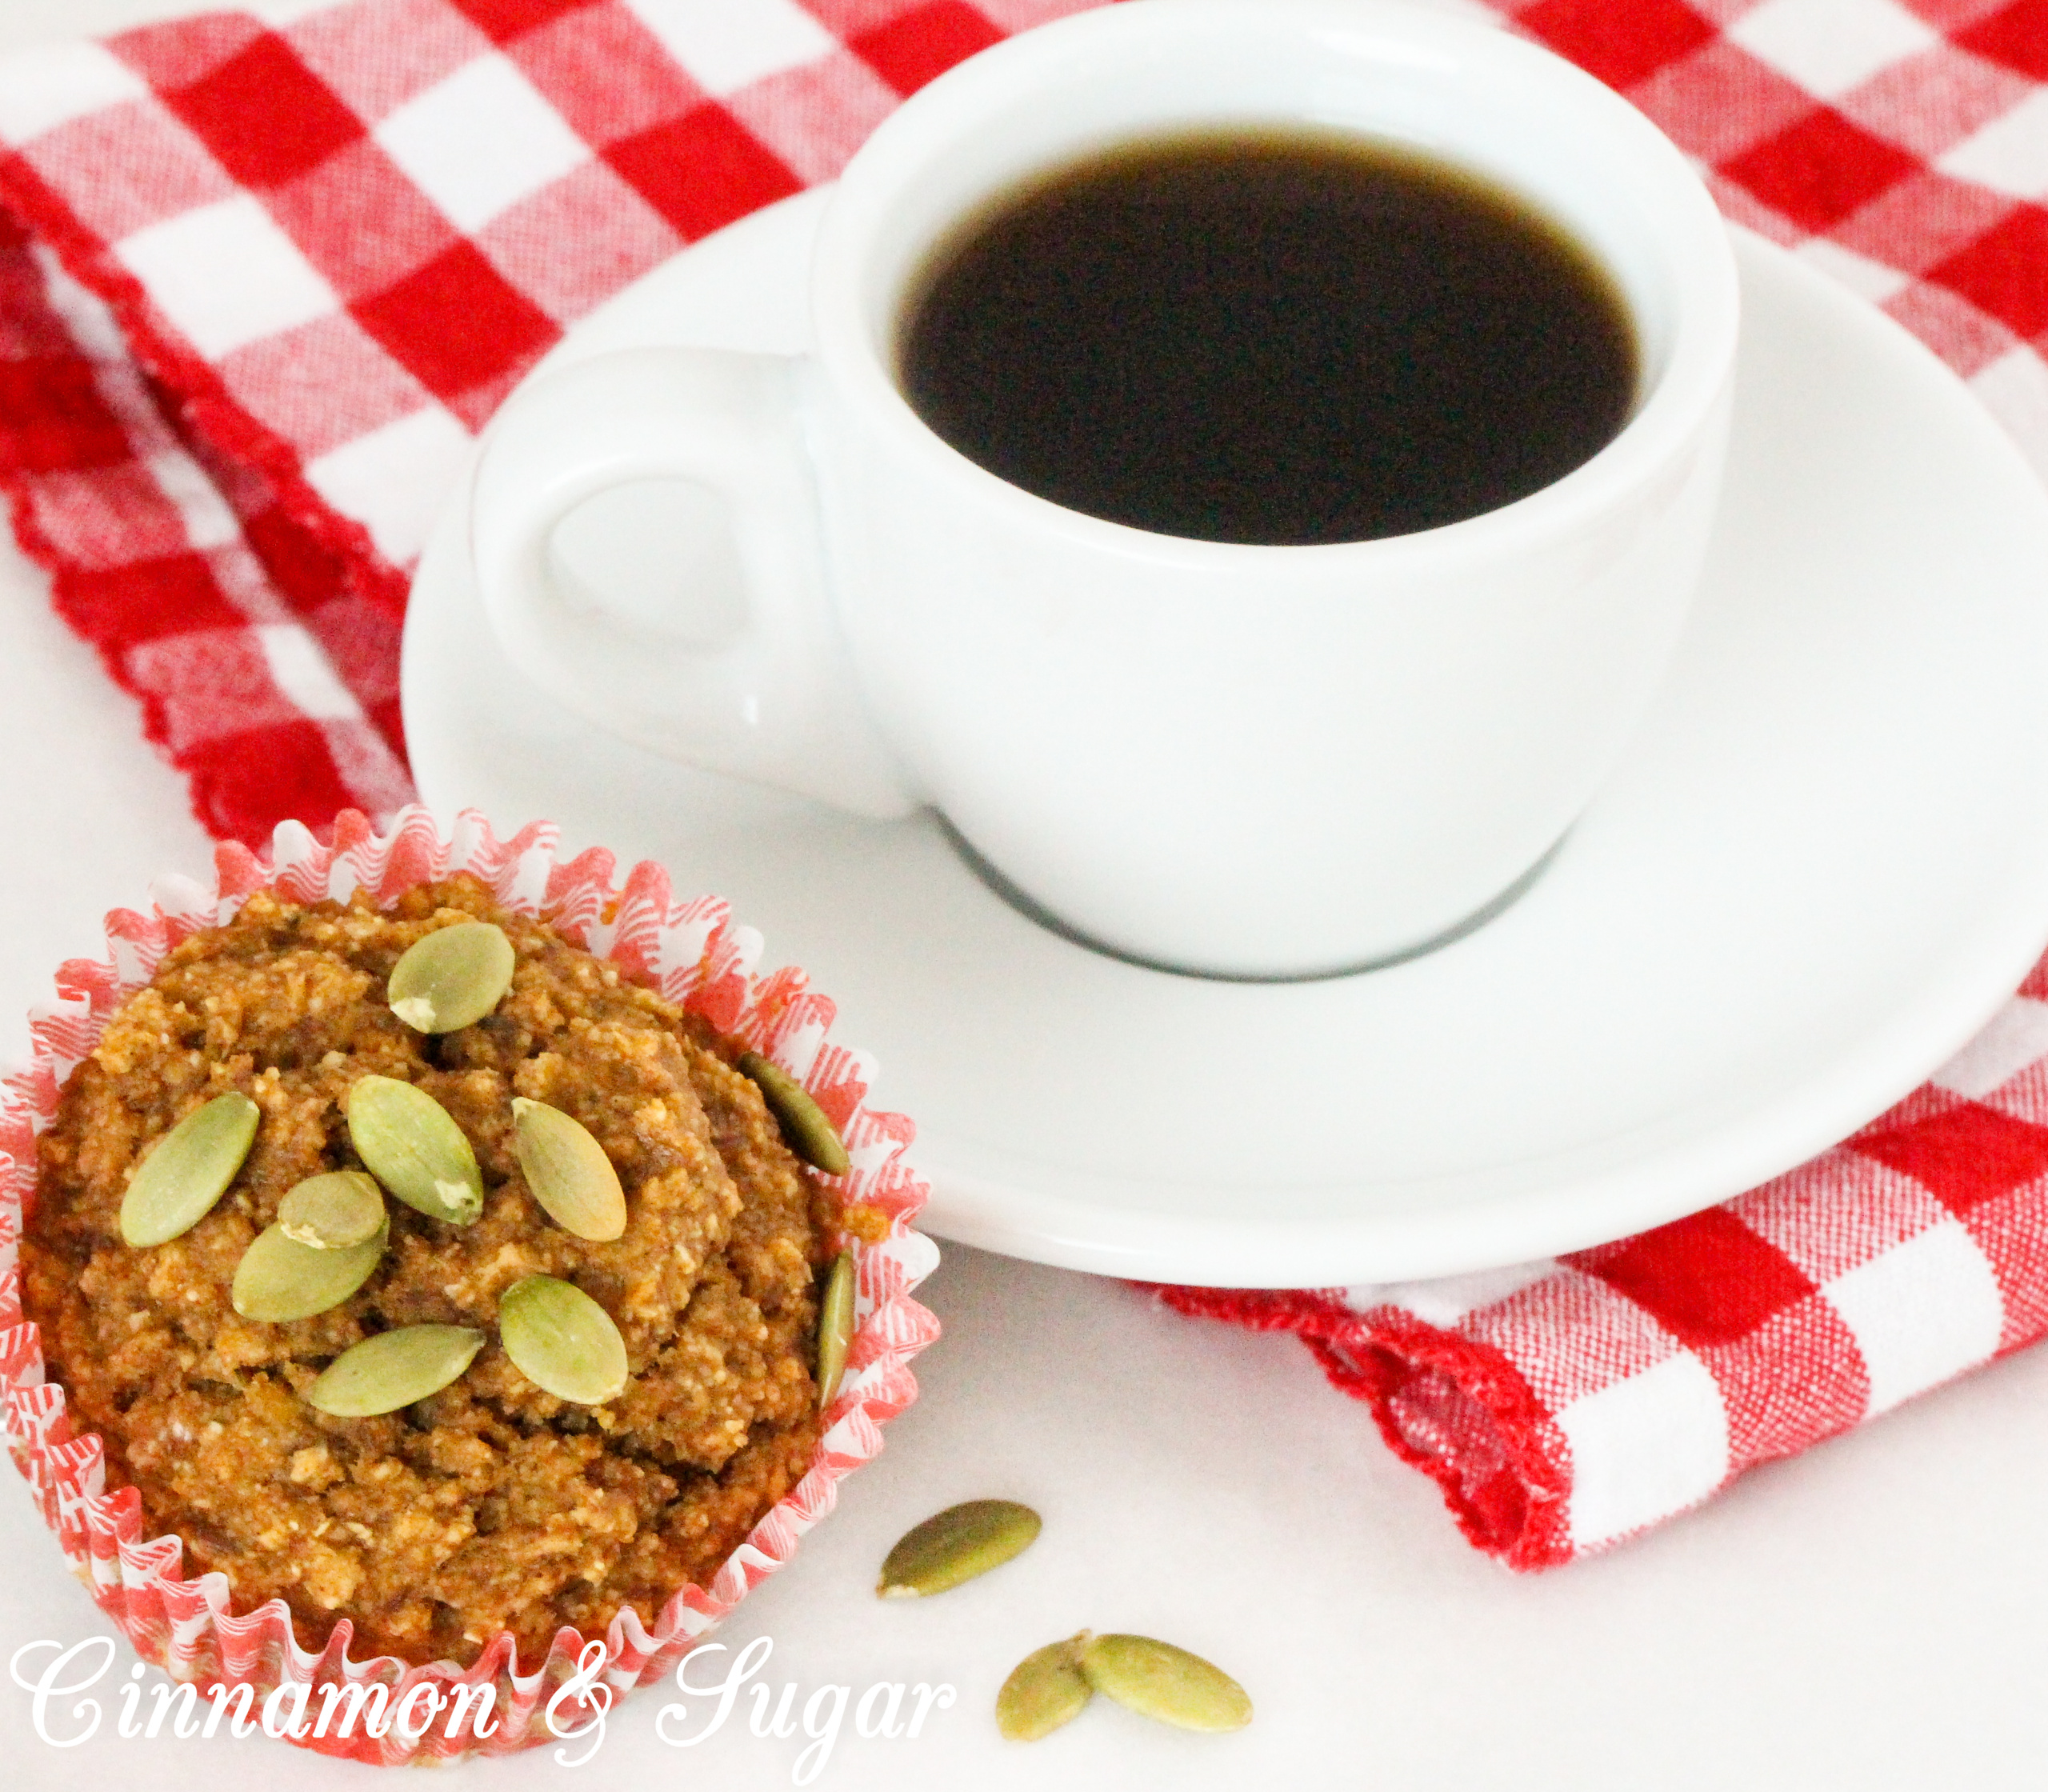 Both vegan and gluten-free, Pumpkin Quinoa Muffins caters not only to dietary restrictions but is a delicous, healthy treat for everyone who enjoys moist, yummy muffins! Recipe shared with permission granted by Debra H. Goldstein, author of THREE TREATS TOO MANY. 